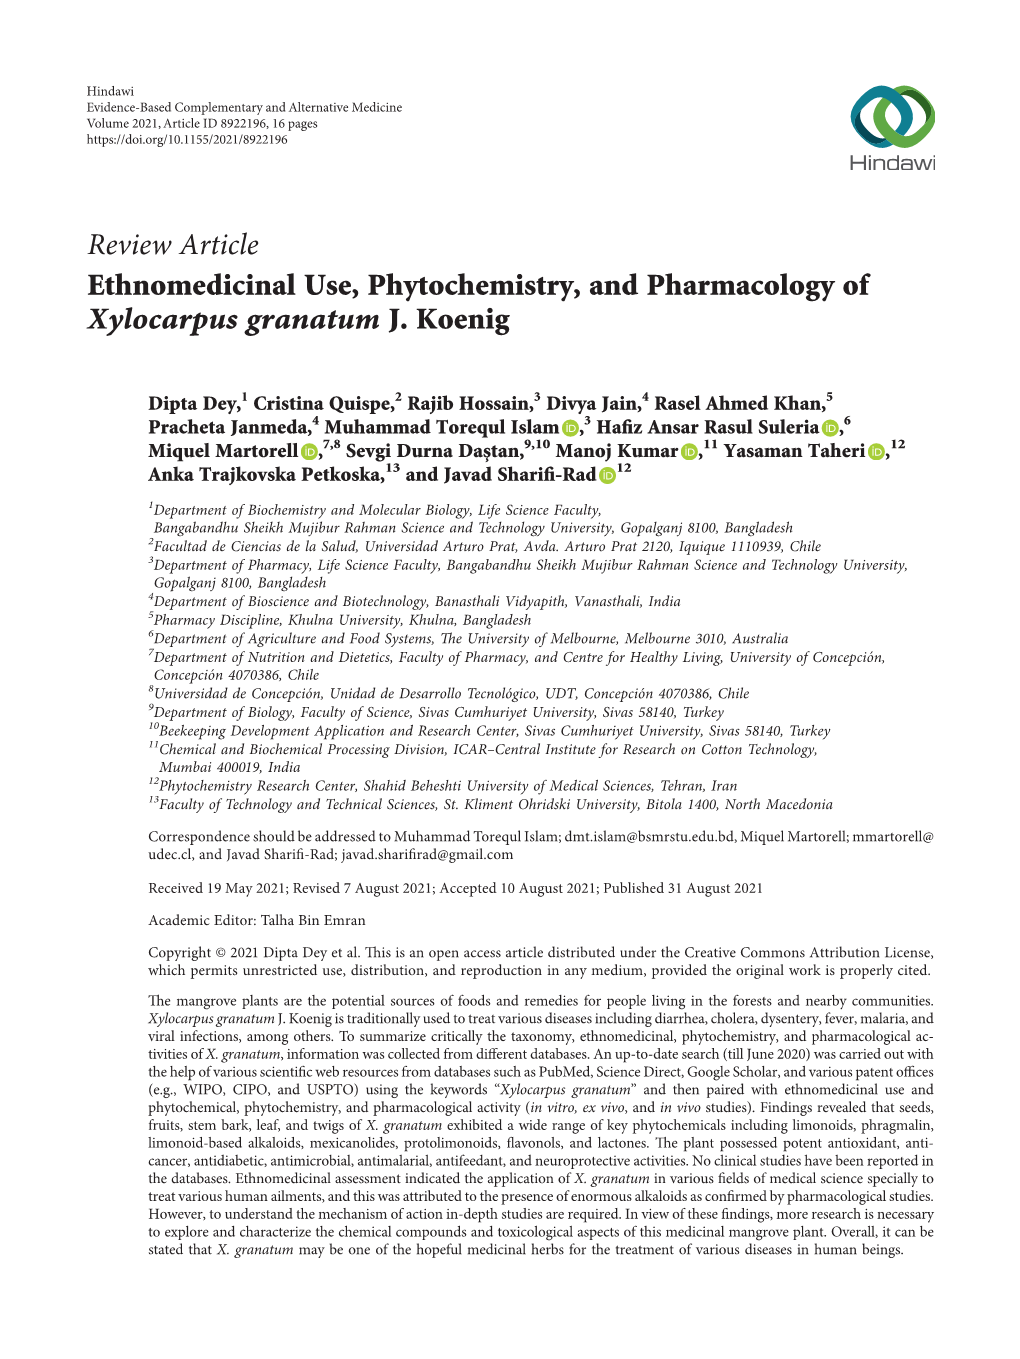 Review Article Ethnomedicinal Use, Phytochemistry, and Pharmacology of Xylocarpus Granatum J